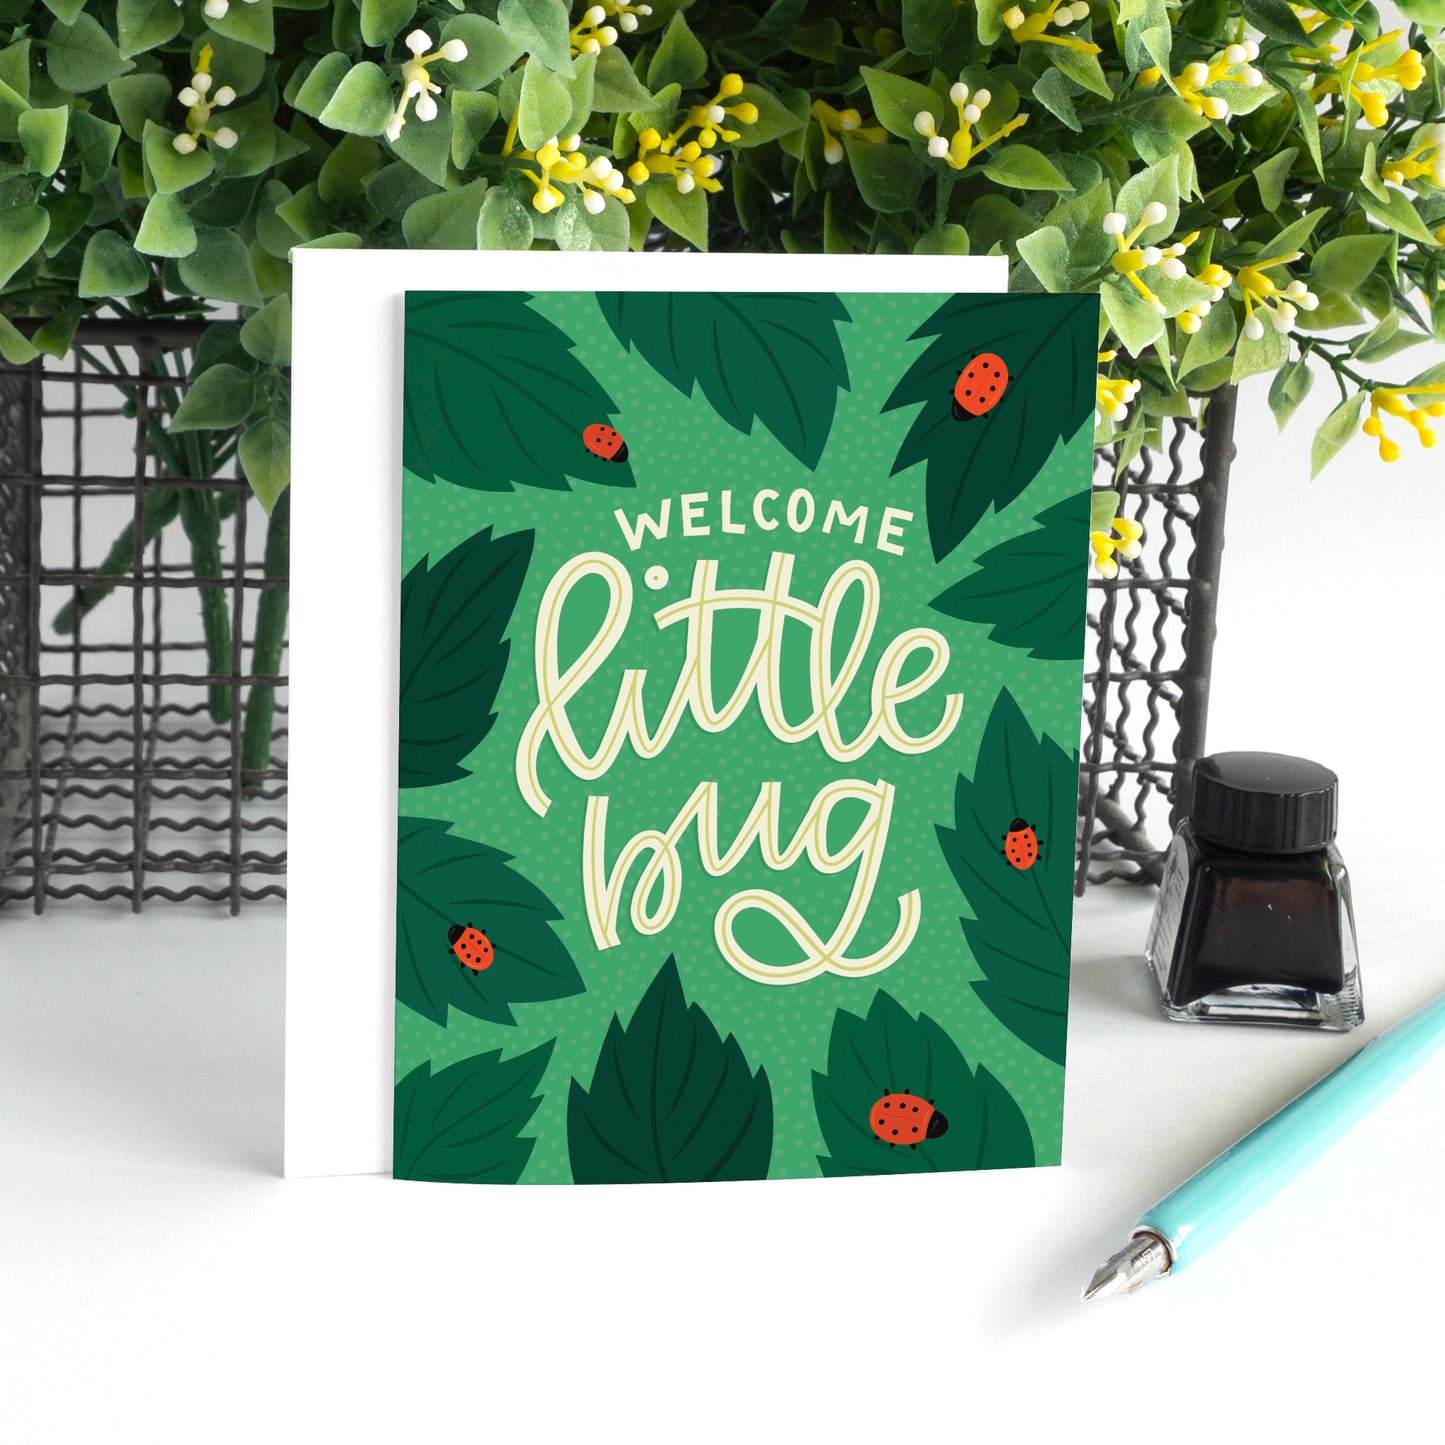 Welcome Little Bug Baby Card